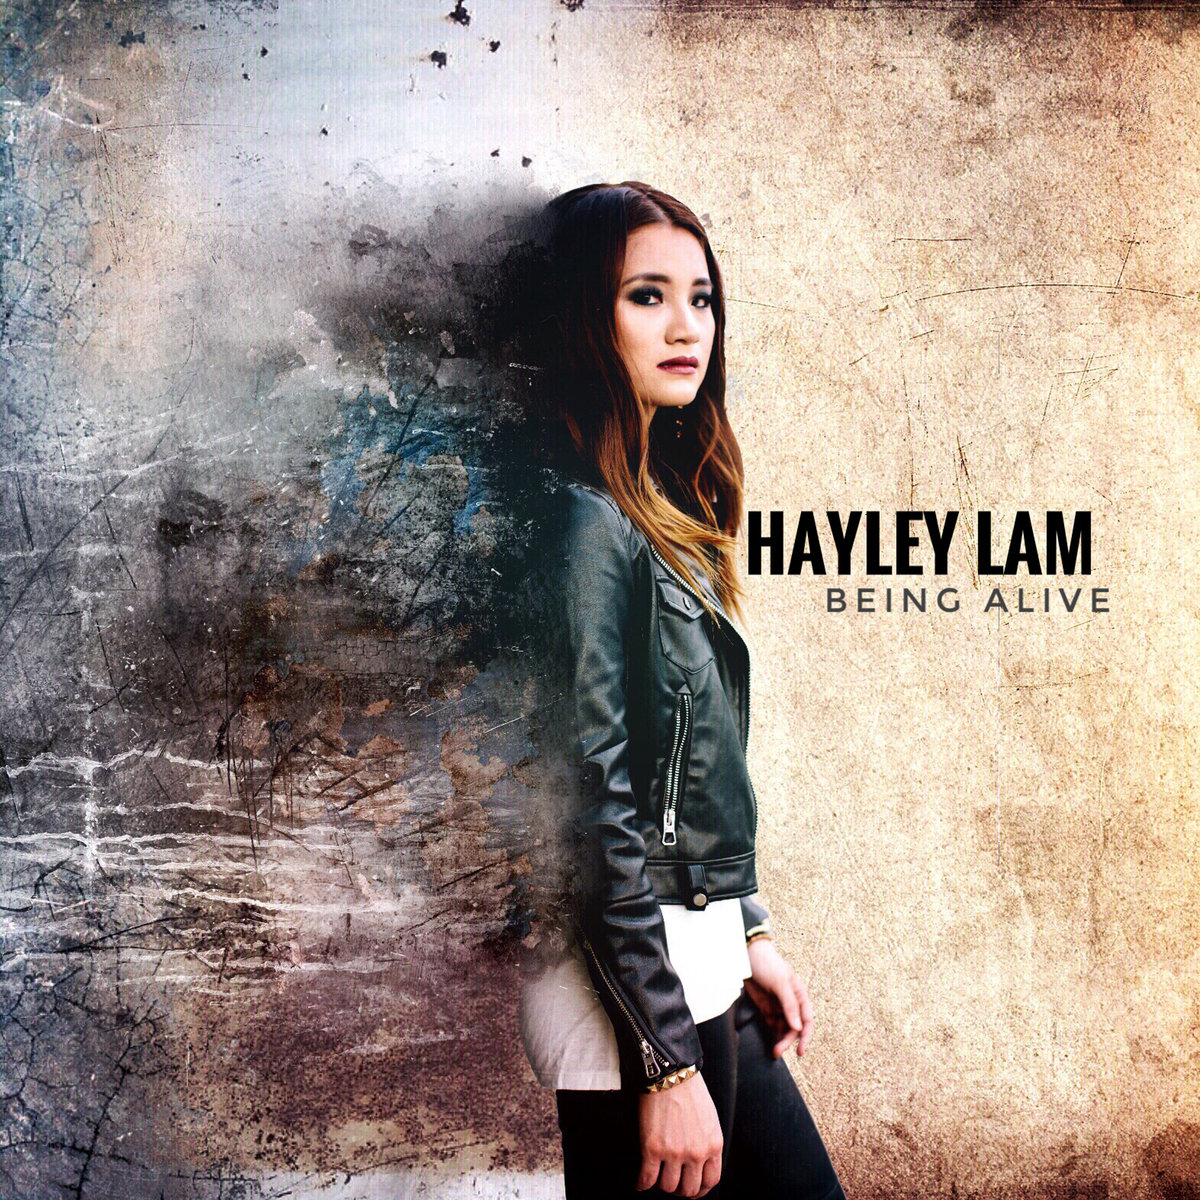  Hayley Lam – “Being Alive”